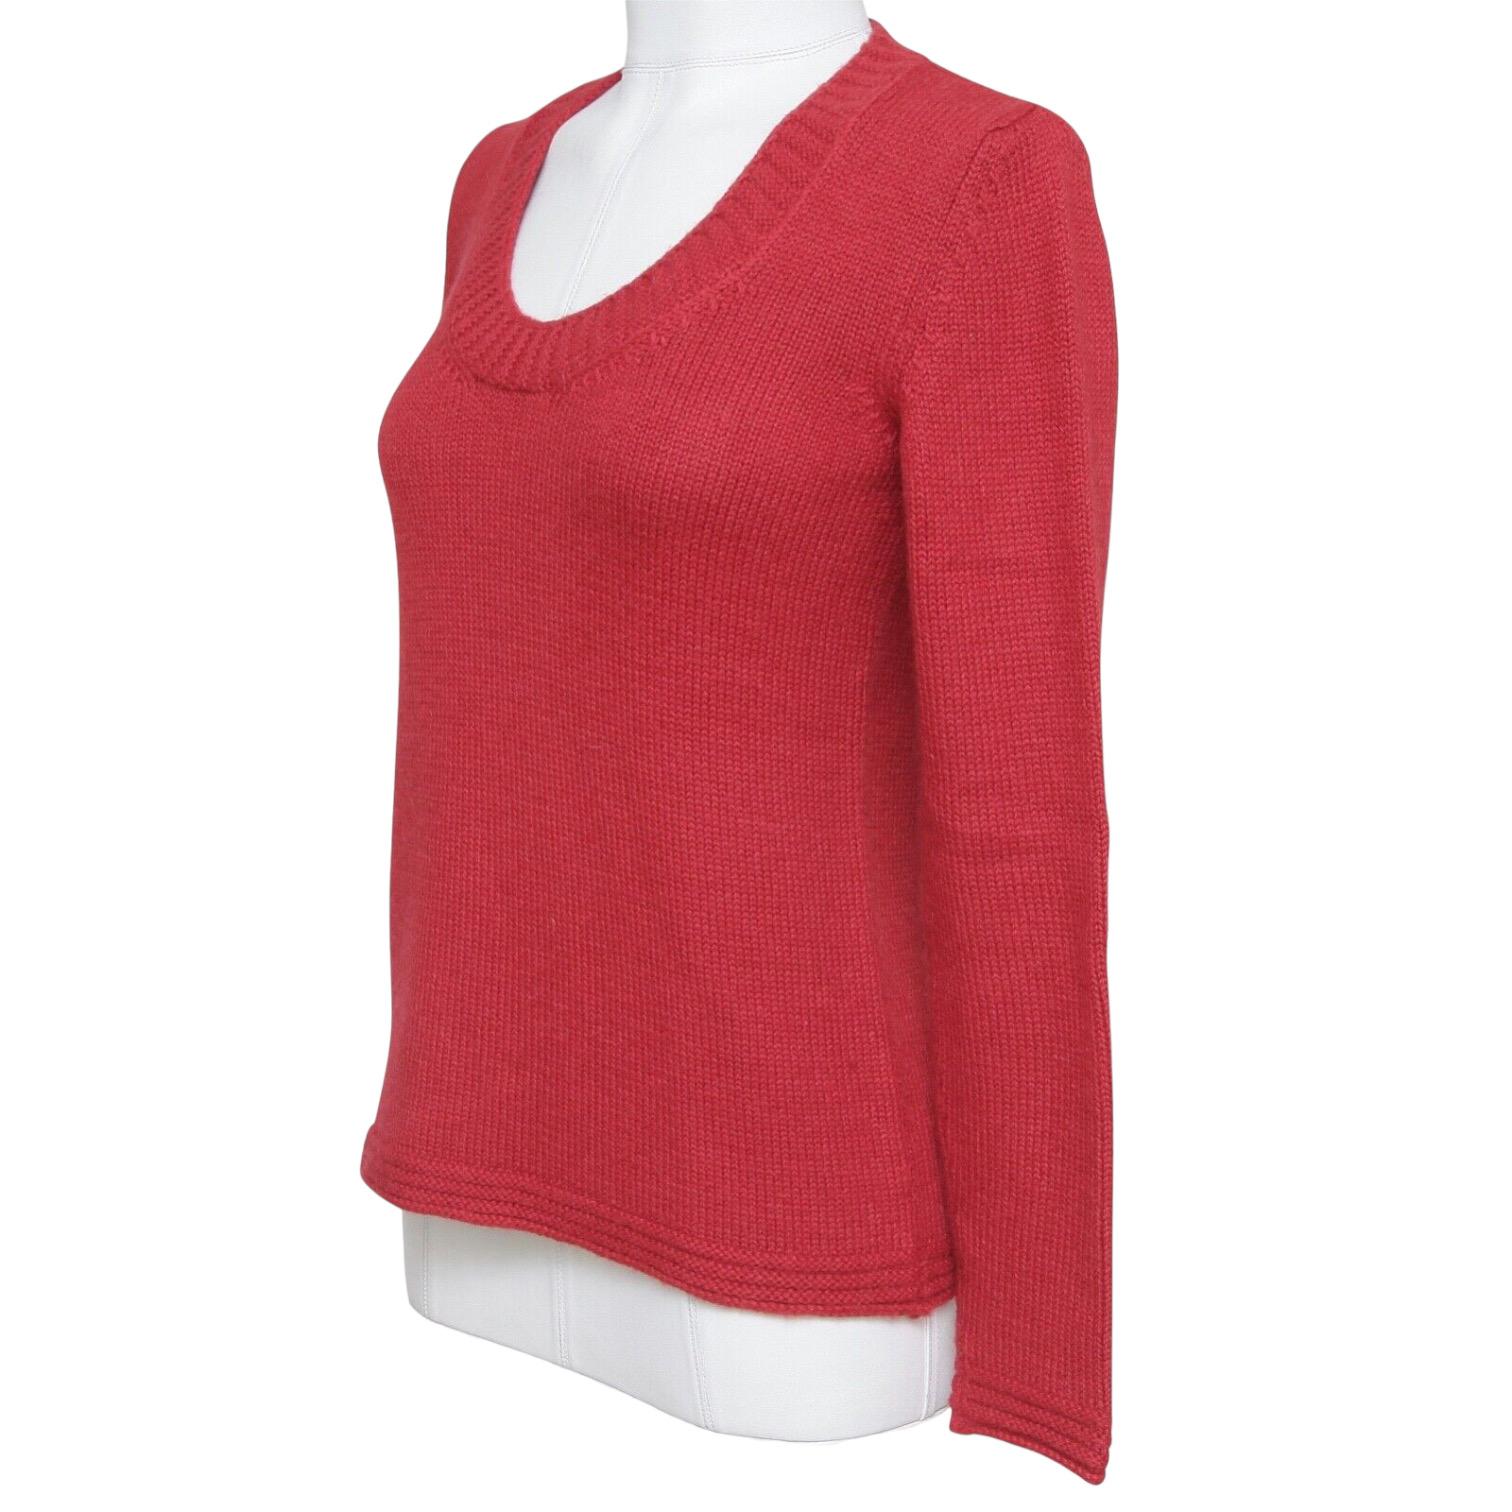 CHLOE Sweater Knit Top Shirt Long Sleeve Red Alpaca Scoop Neck Sz XS In Excellent Condition For Sale In Hollywood, FL